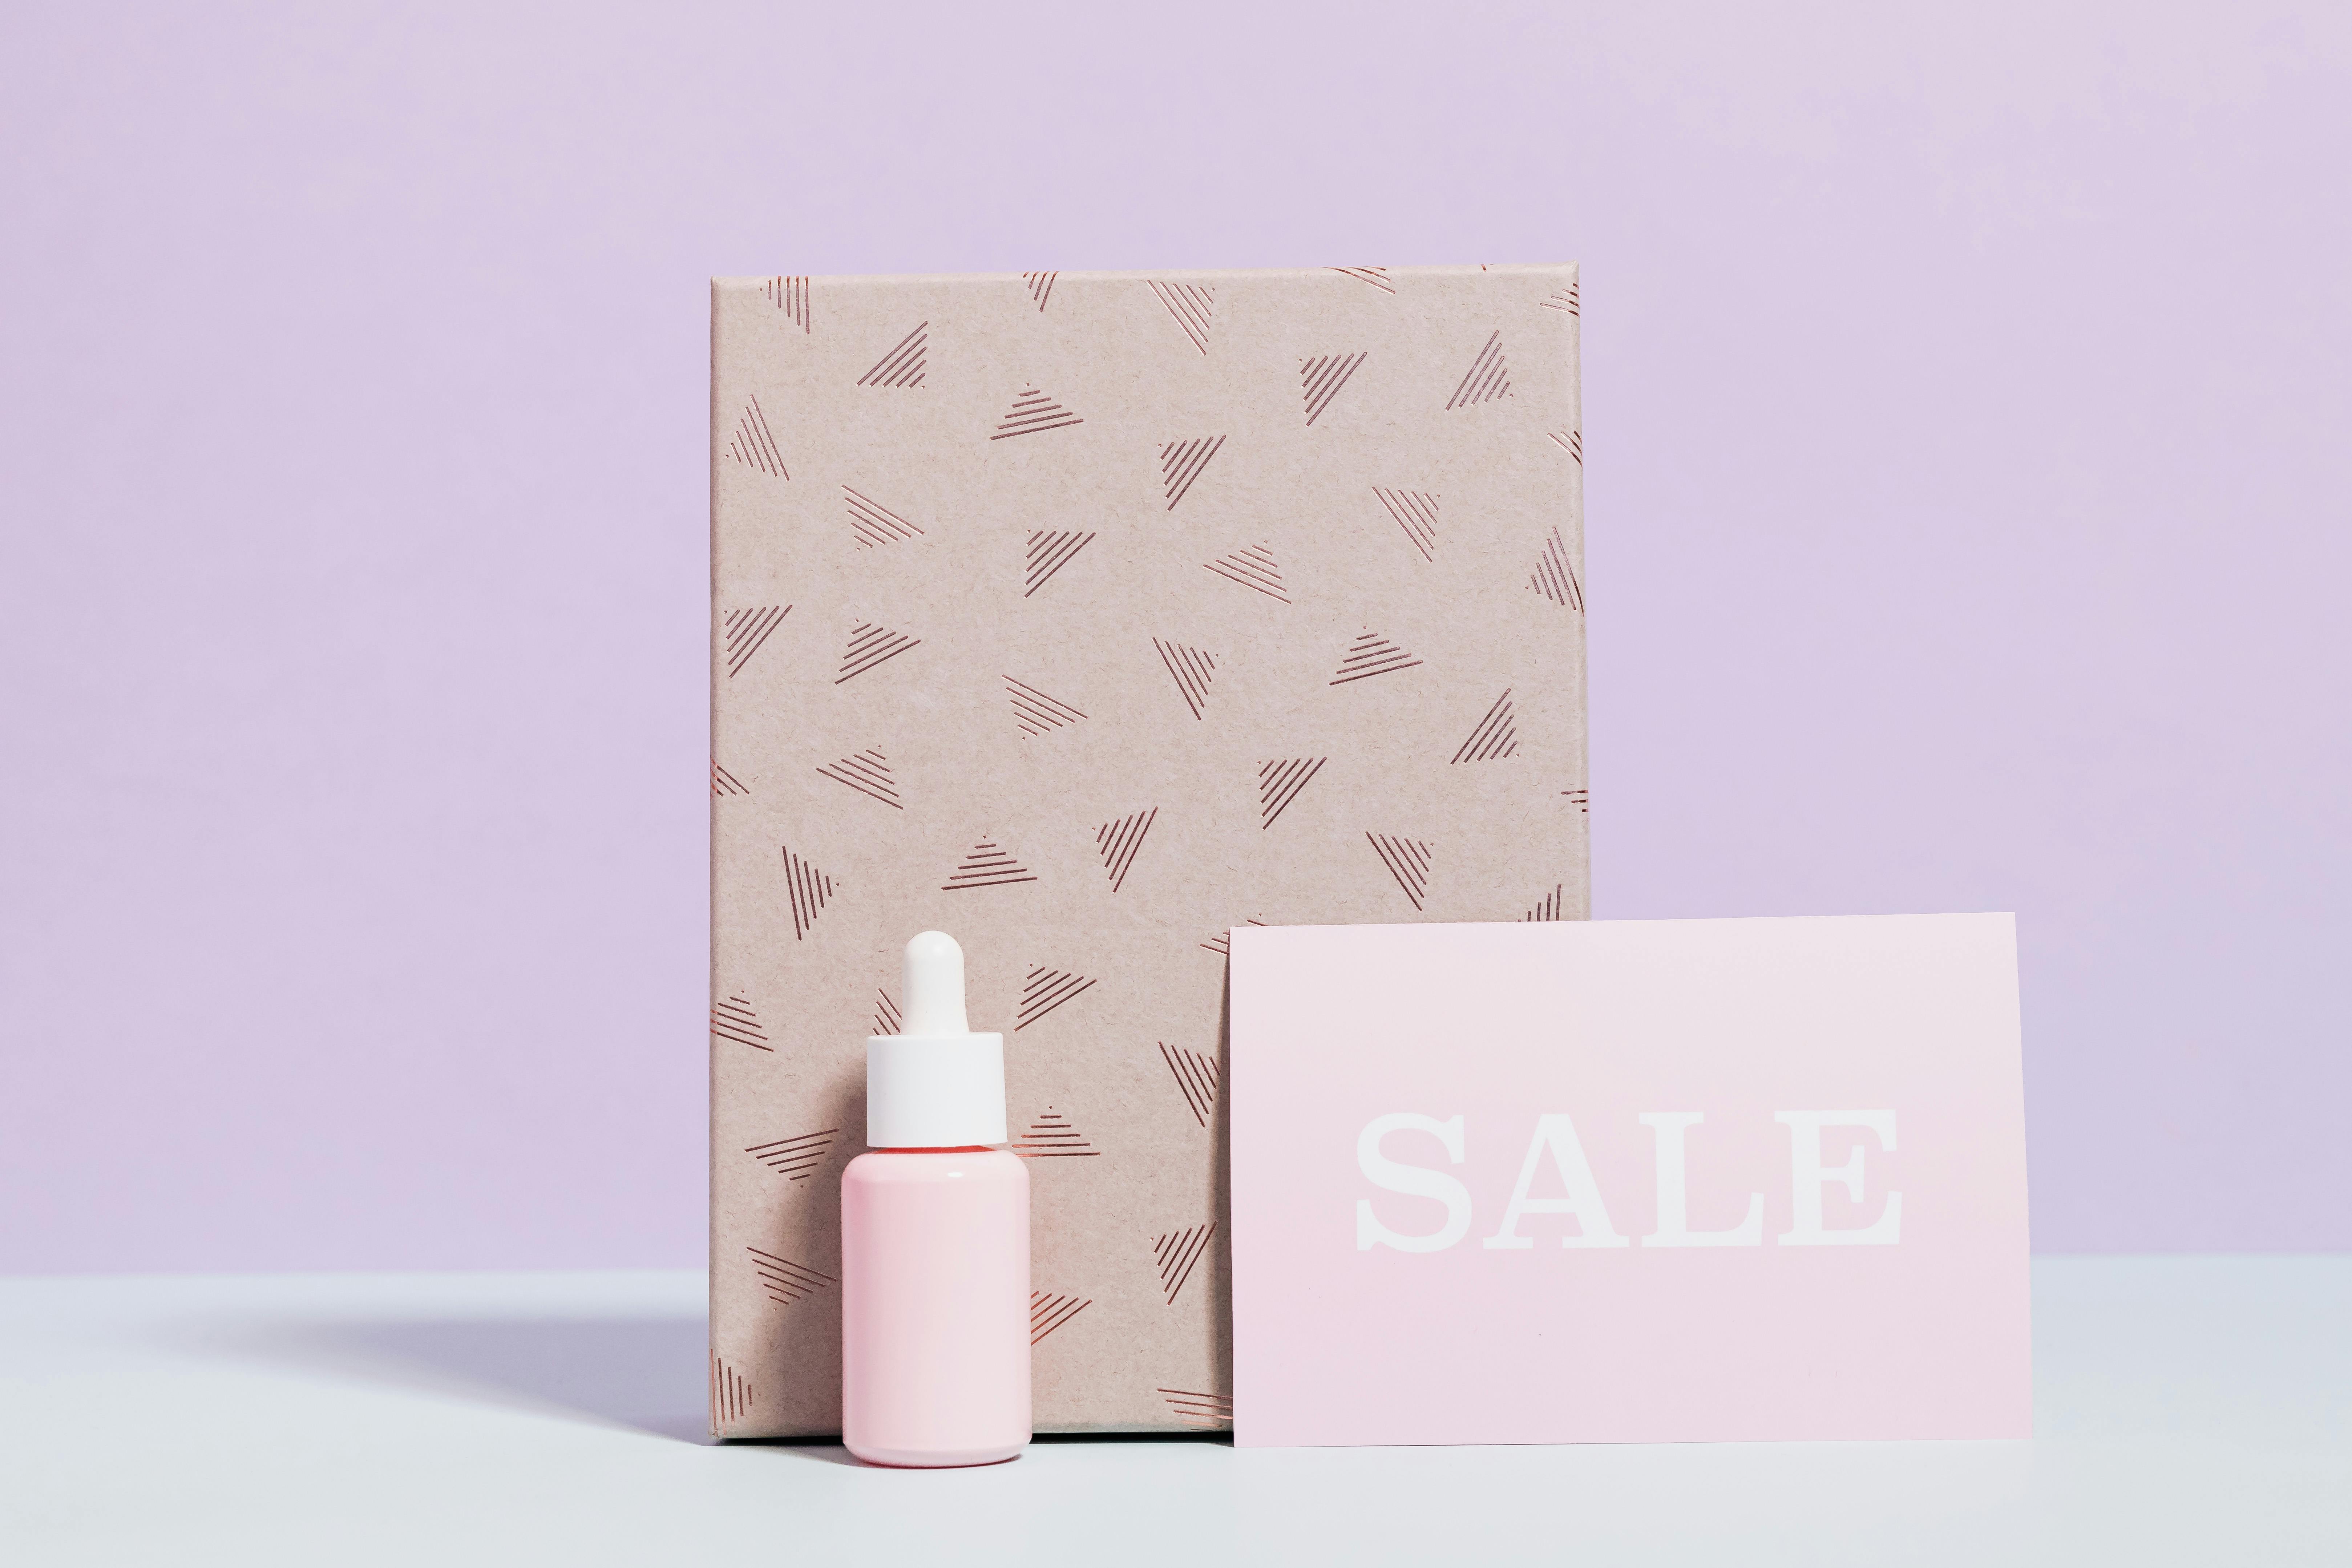 healthcare product in pink bottle with printed paper bag on sale